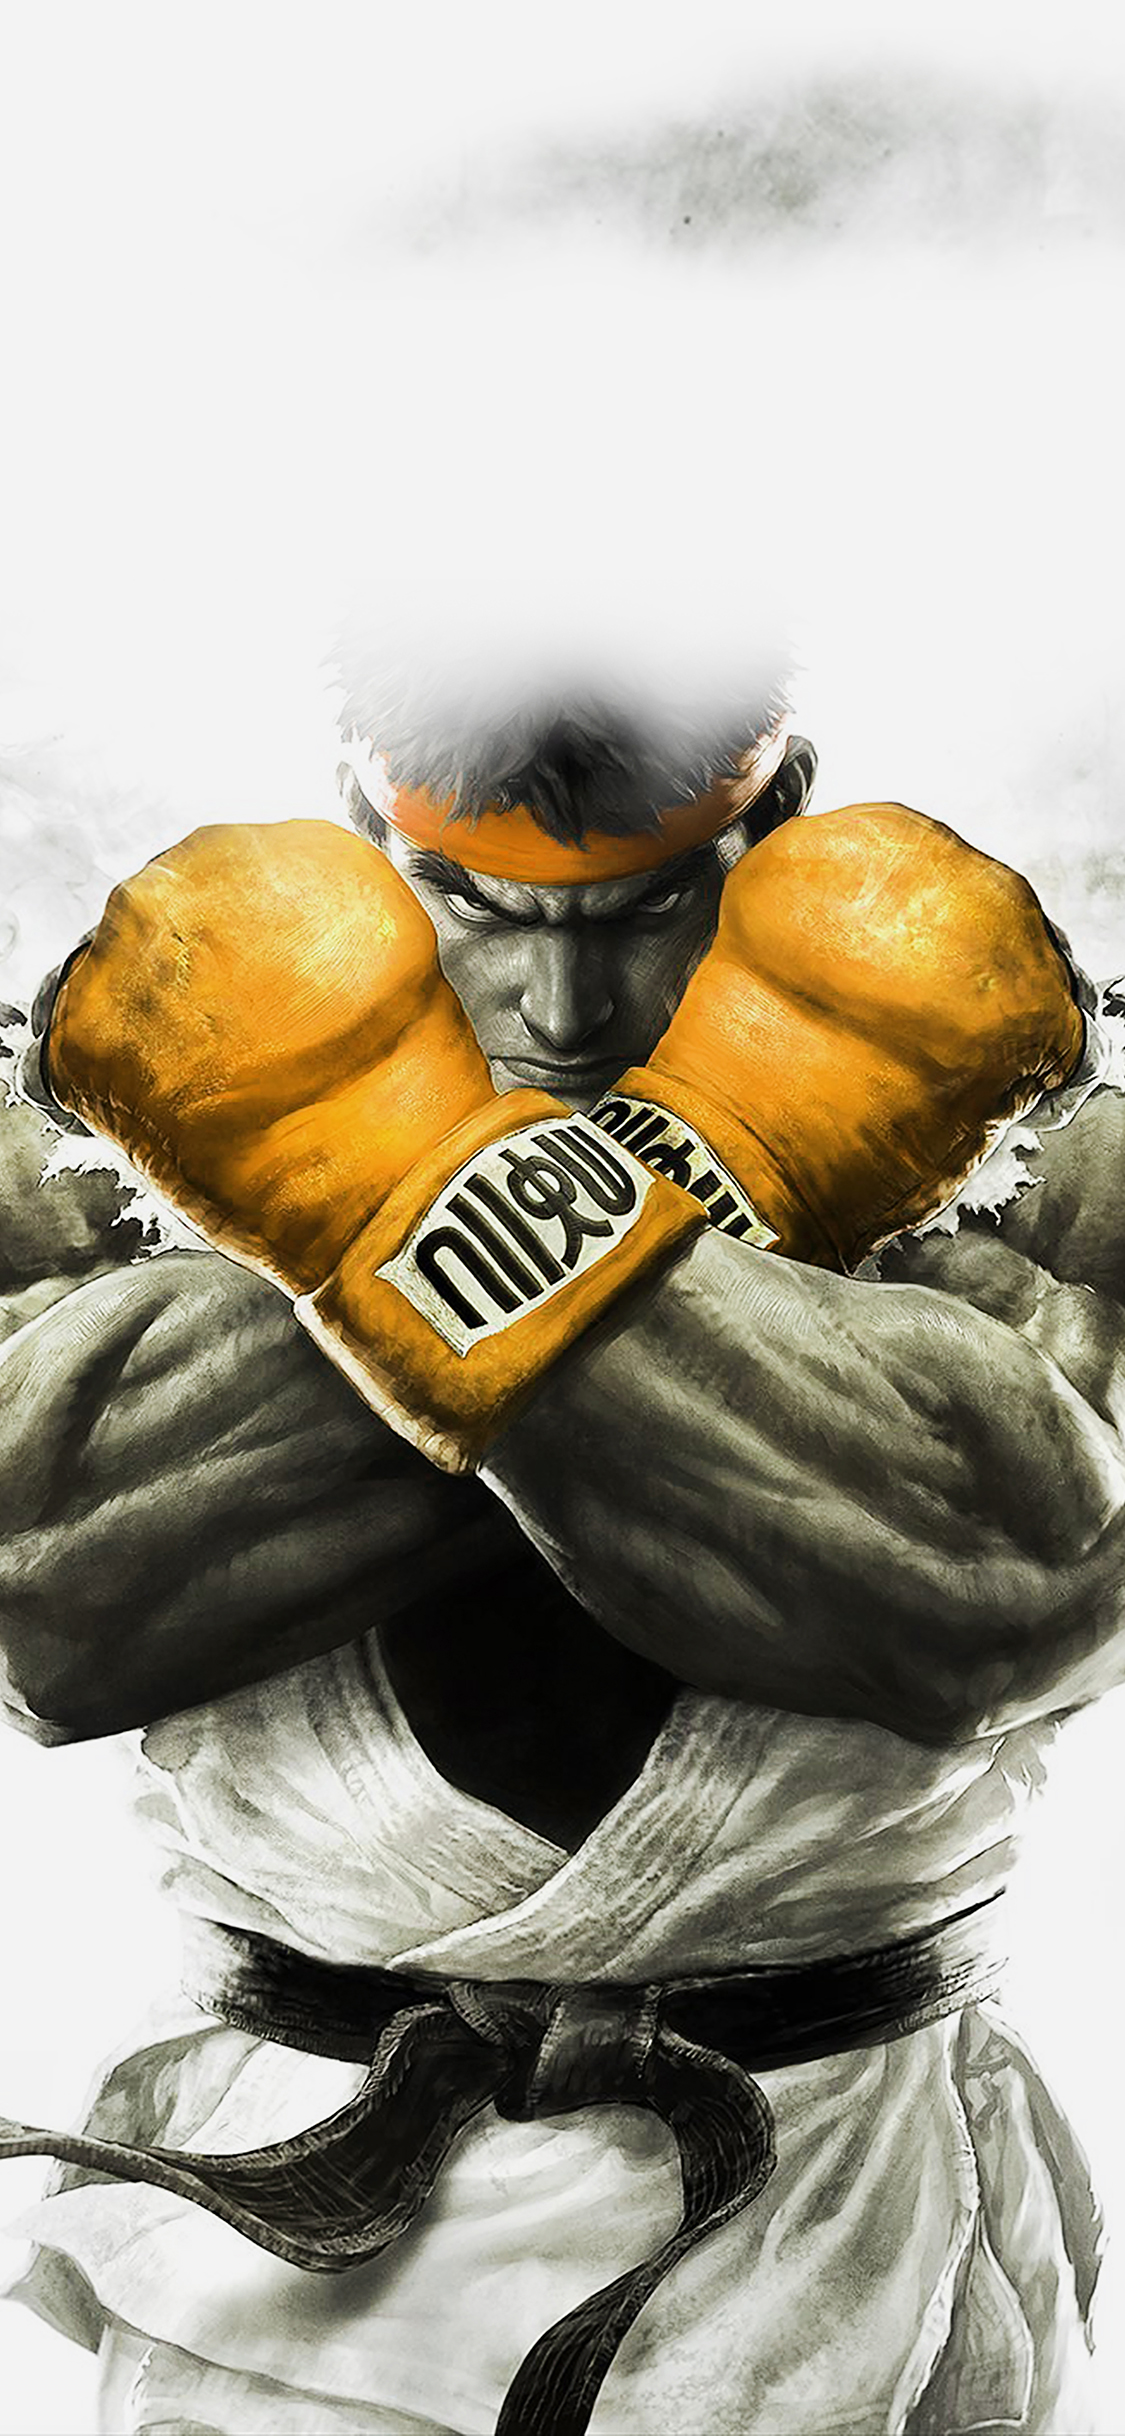 street fighter iphone wallpaper,boxing glove,boxing,boxing equipment,striking combat sports,sports equipment